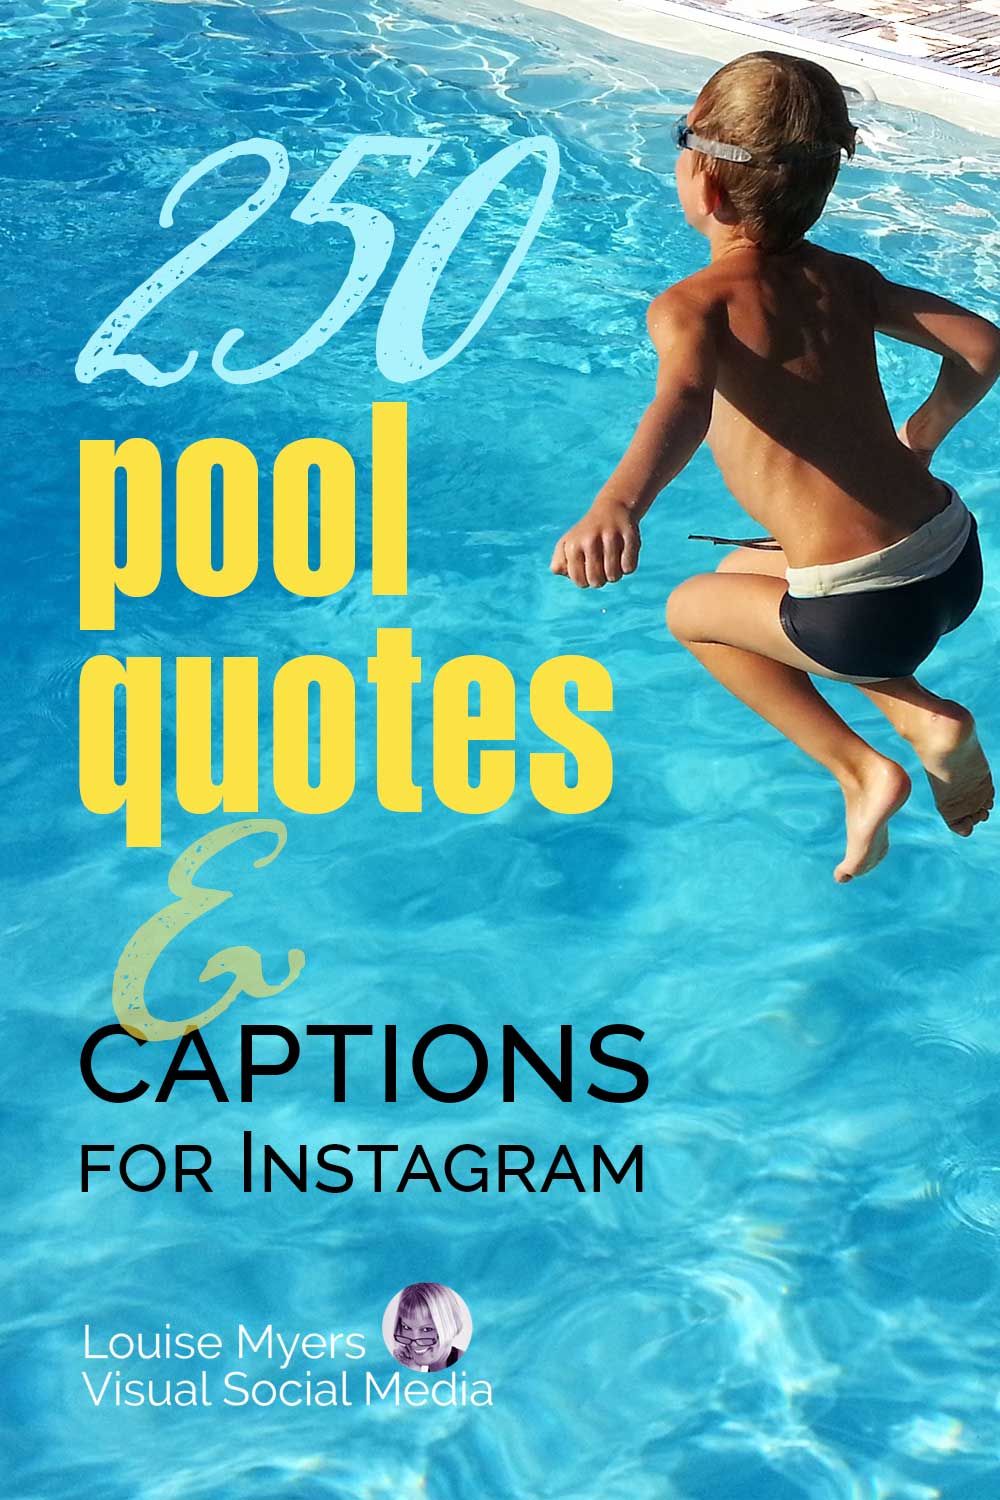 boy jumping into big aqua pool says 250 Pool Quotes & Captions for Instagram.